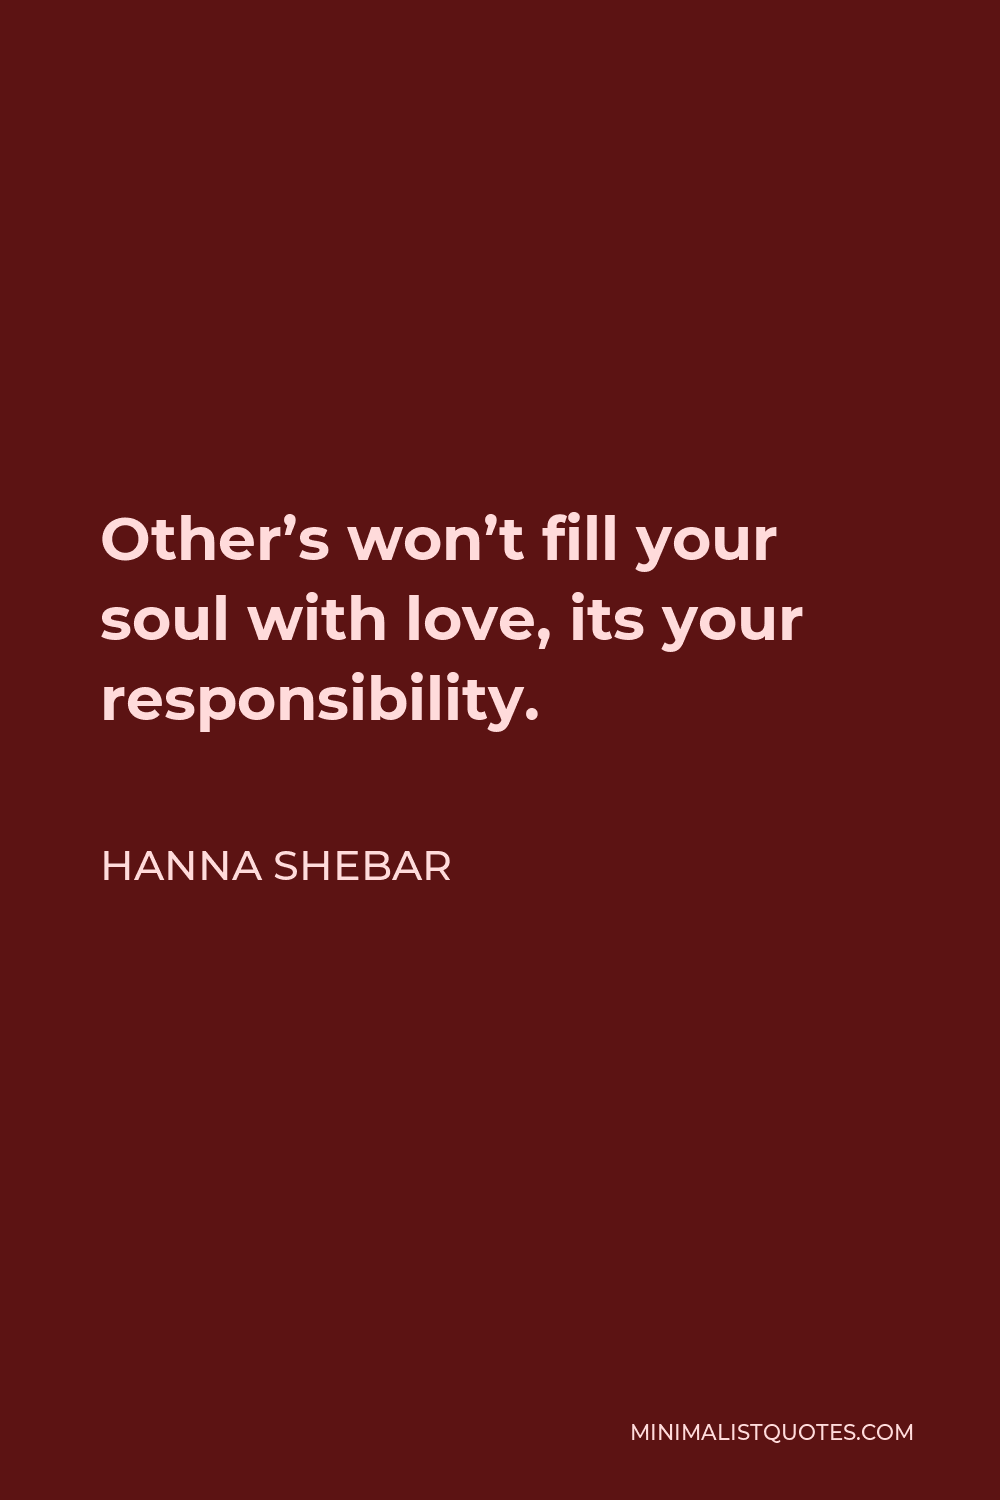 Hanna Shebar Quote - Other’s won’t fill your soul with love, its your responsibility.